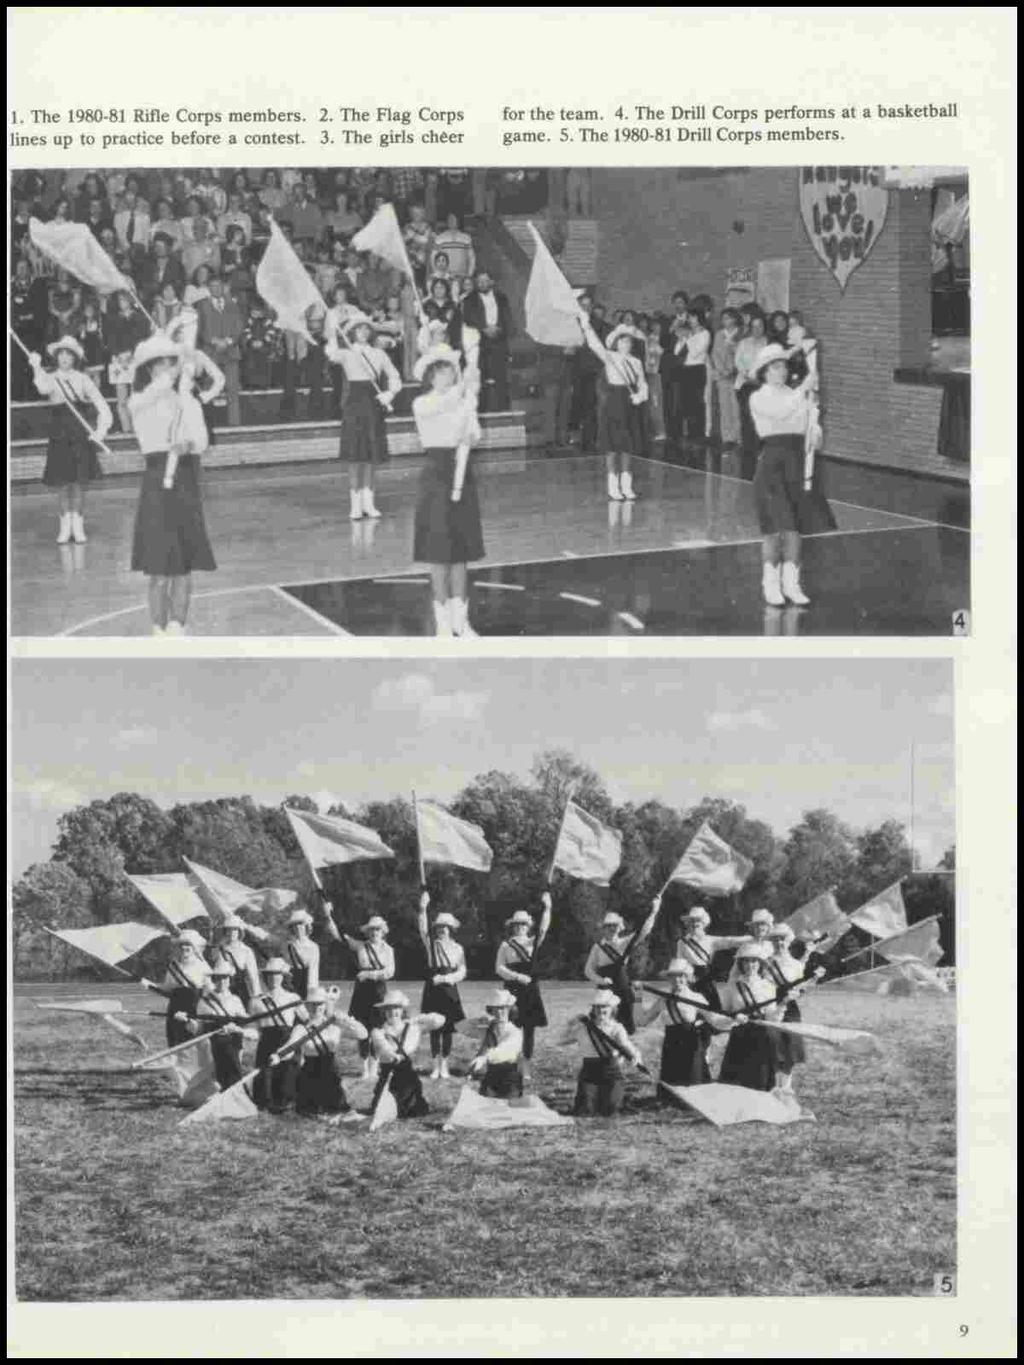 1. The 1980-81 Rifle Corps members. 2. The Flag Corps lines up to practice before a contest. 3.